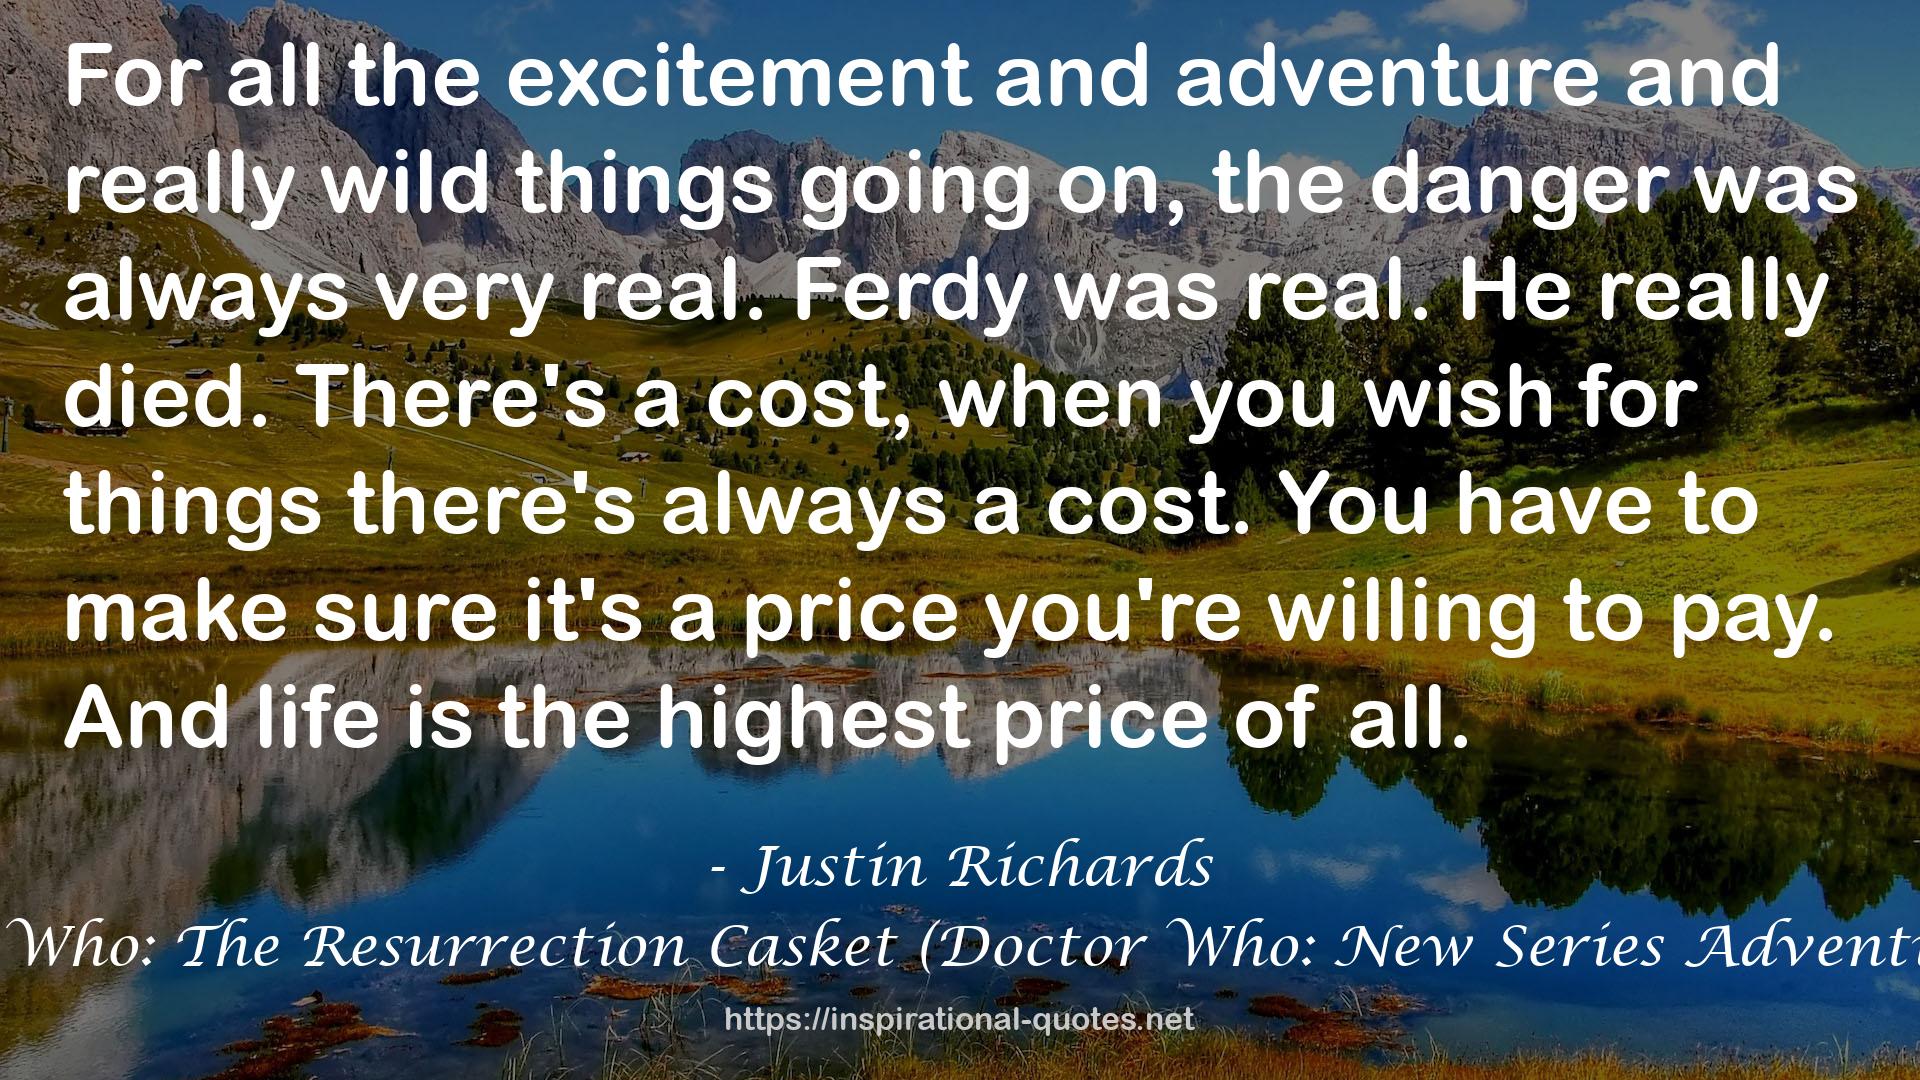 Doctor Who: The Resurrection Casket (Doctor Who: New Series Adventures #9) QUOTES